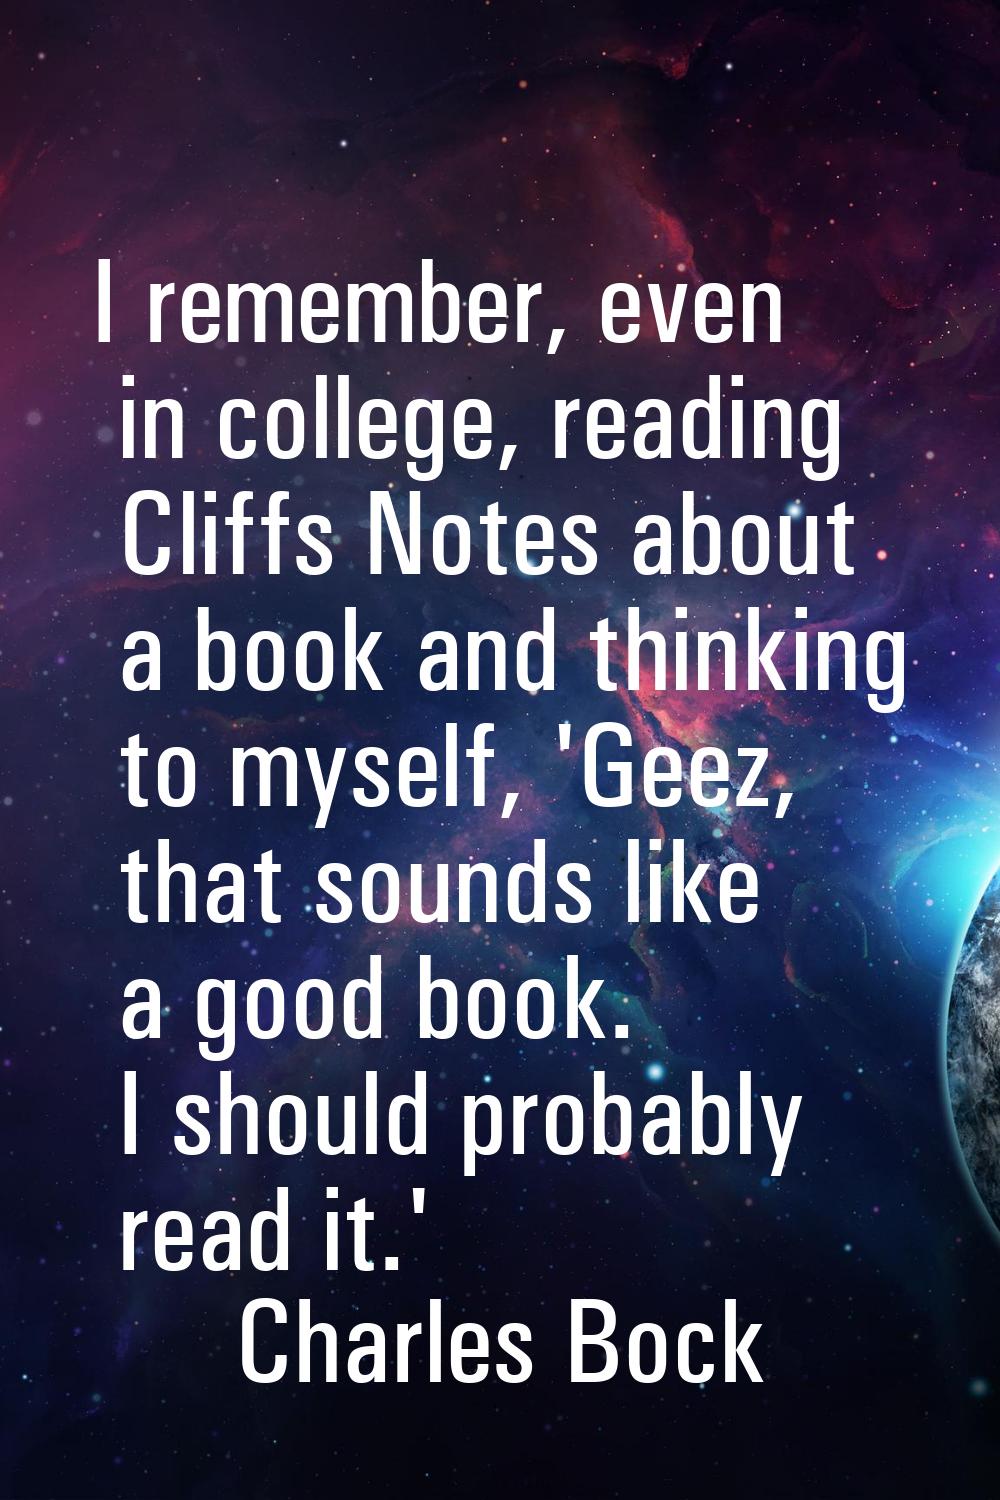 I remember, even in college, reading Cliffs Notes about a book and thinking to myself, 'Geez, that 